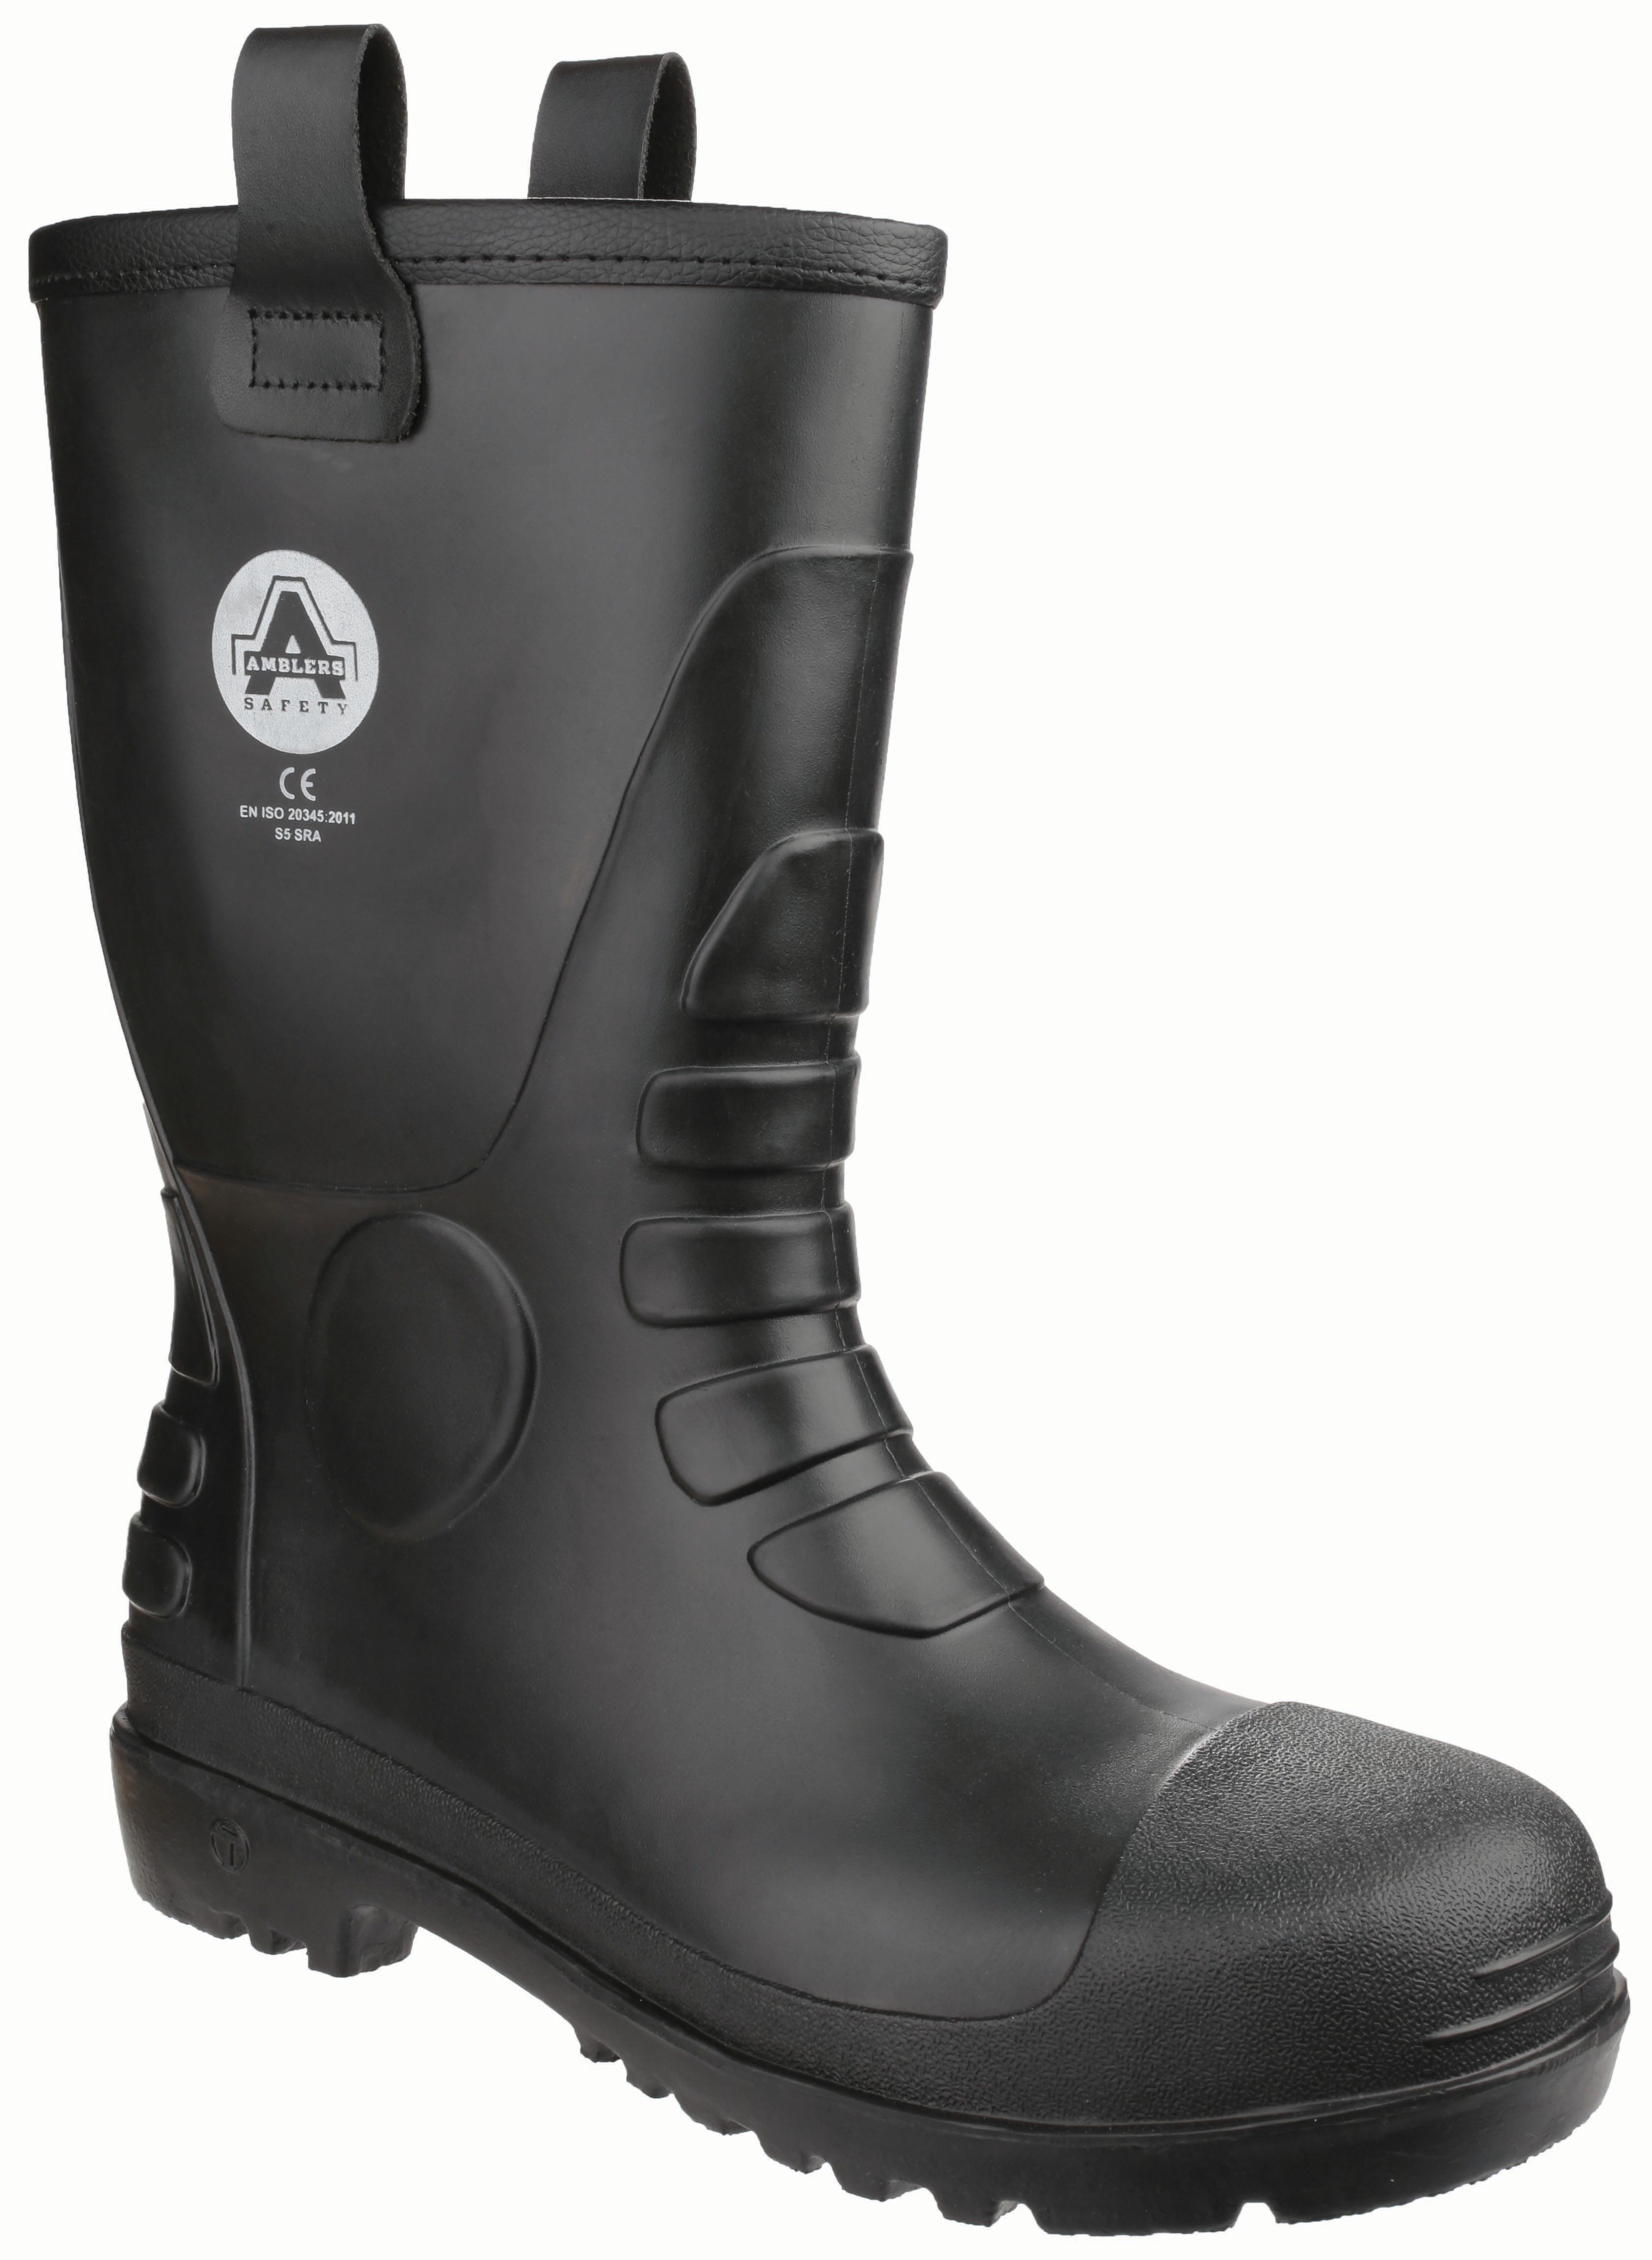 Image of Amblers Safety FS90 Rigger Safety Boot - Black Size 7